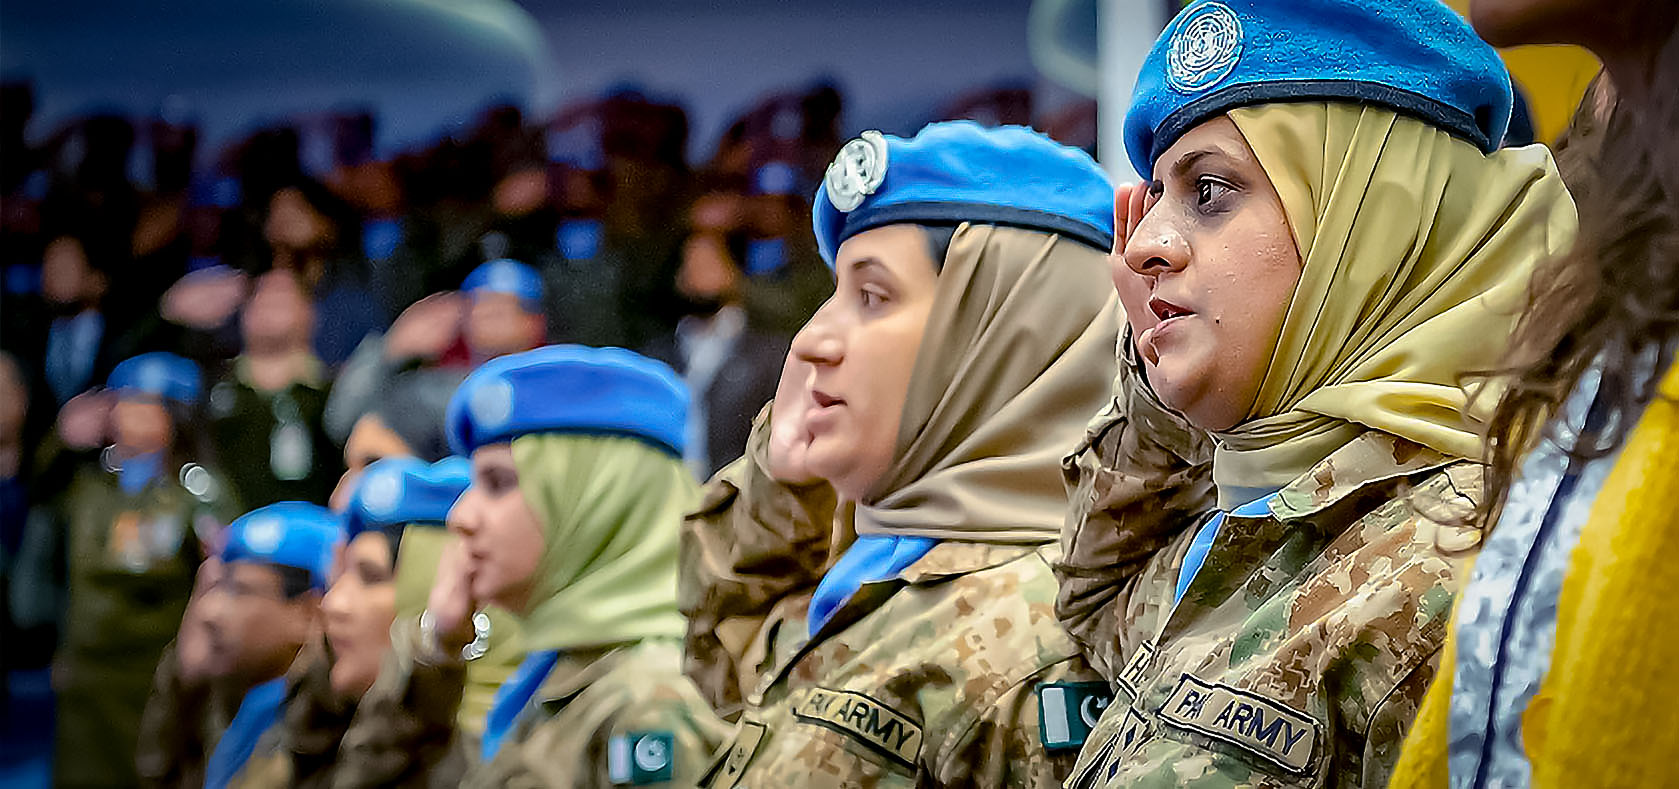 Pakistani women peacekeepers in the audience at the National University of Science and Technology in Islamabad, where Secretary-General António Guterres delivered an address on the topic of peacekeeping.